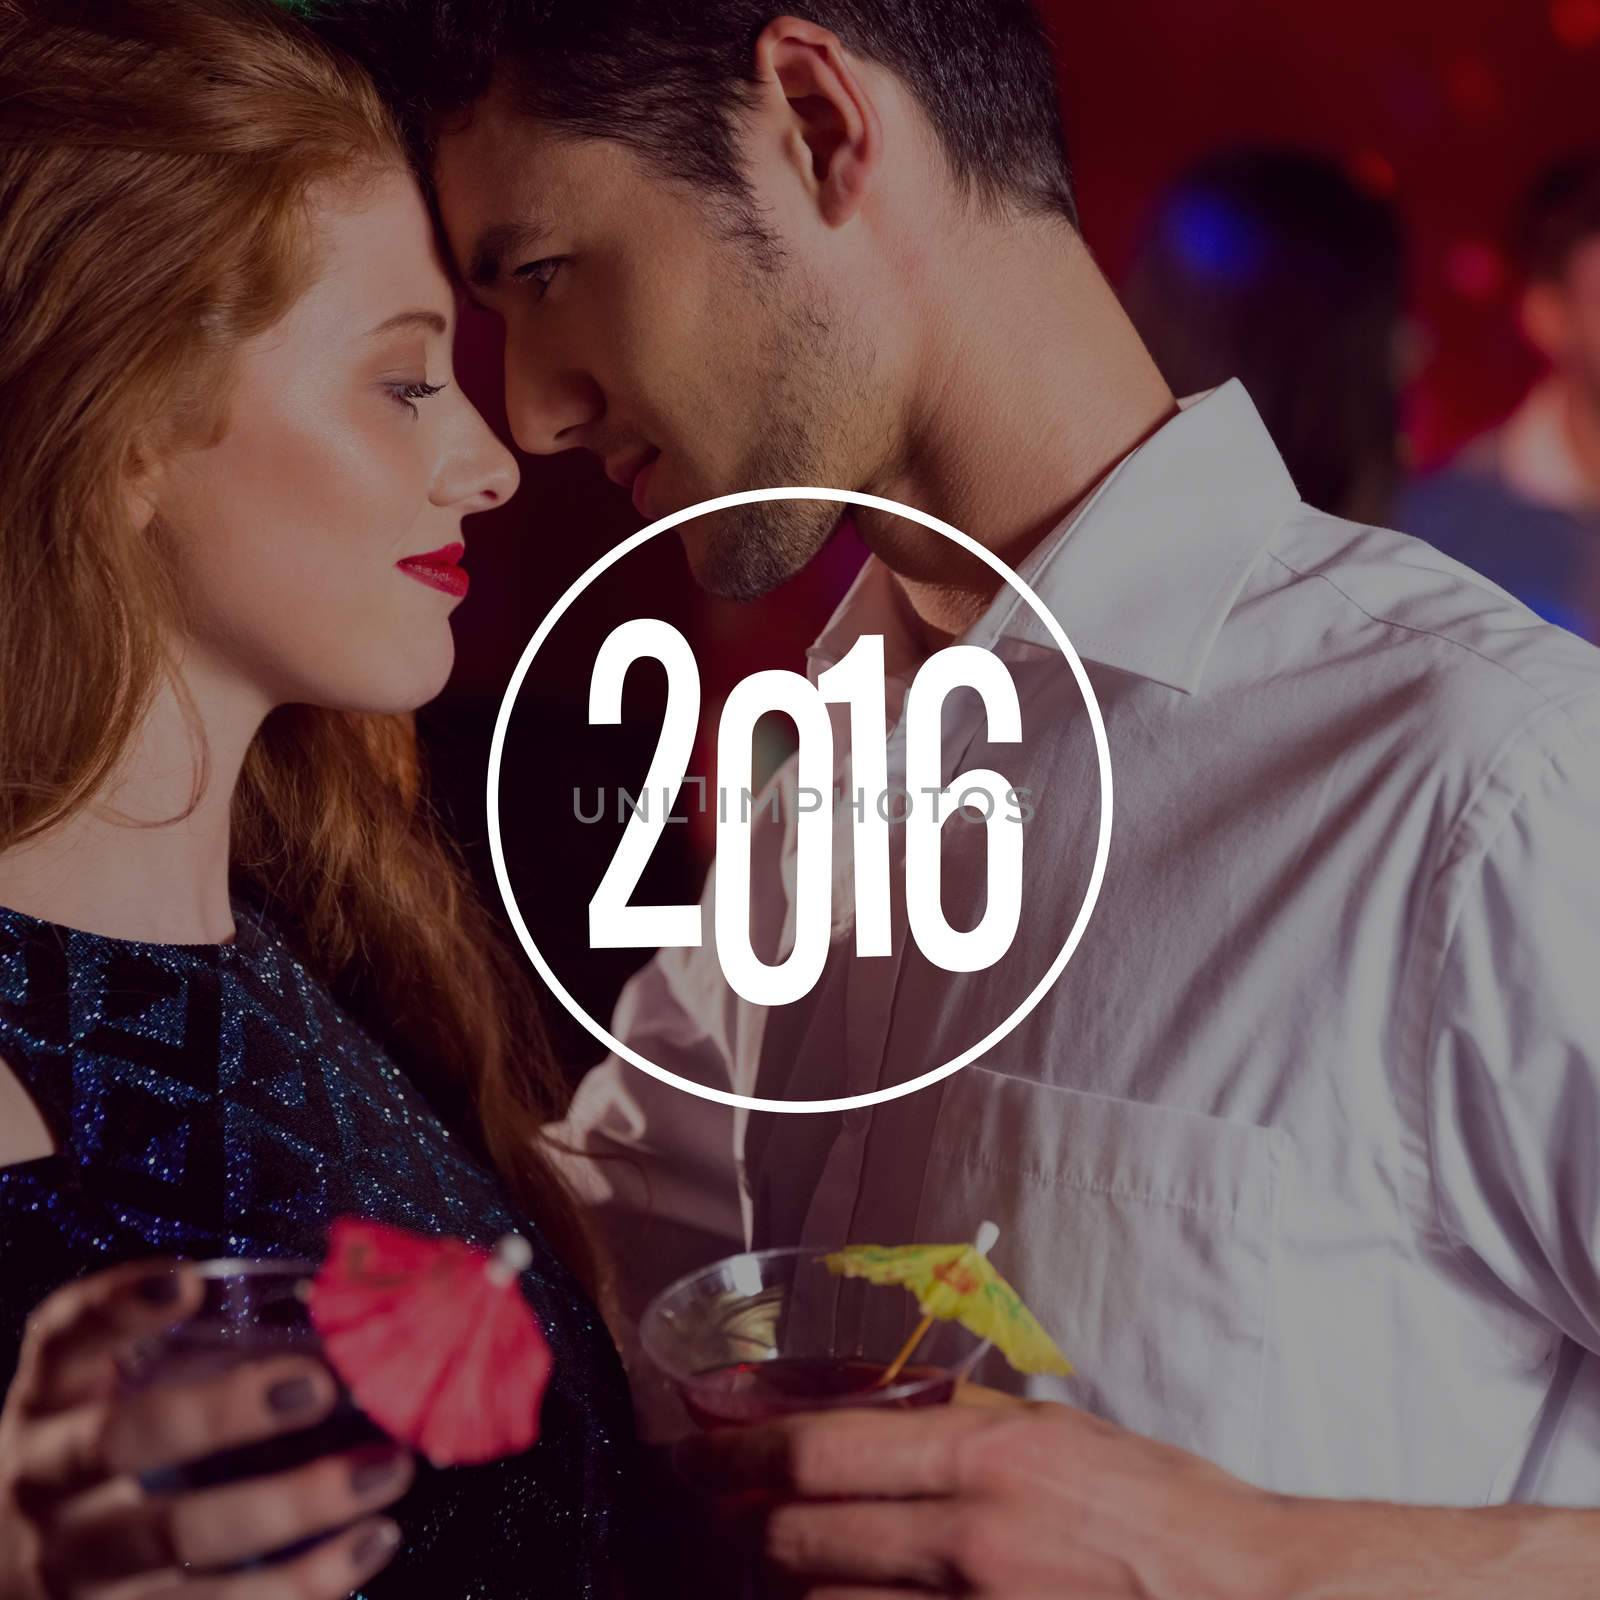 New year graphic against cute couple drinking cocktails together